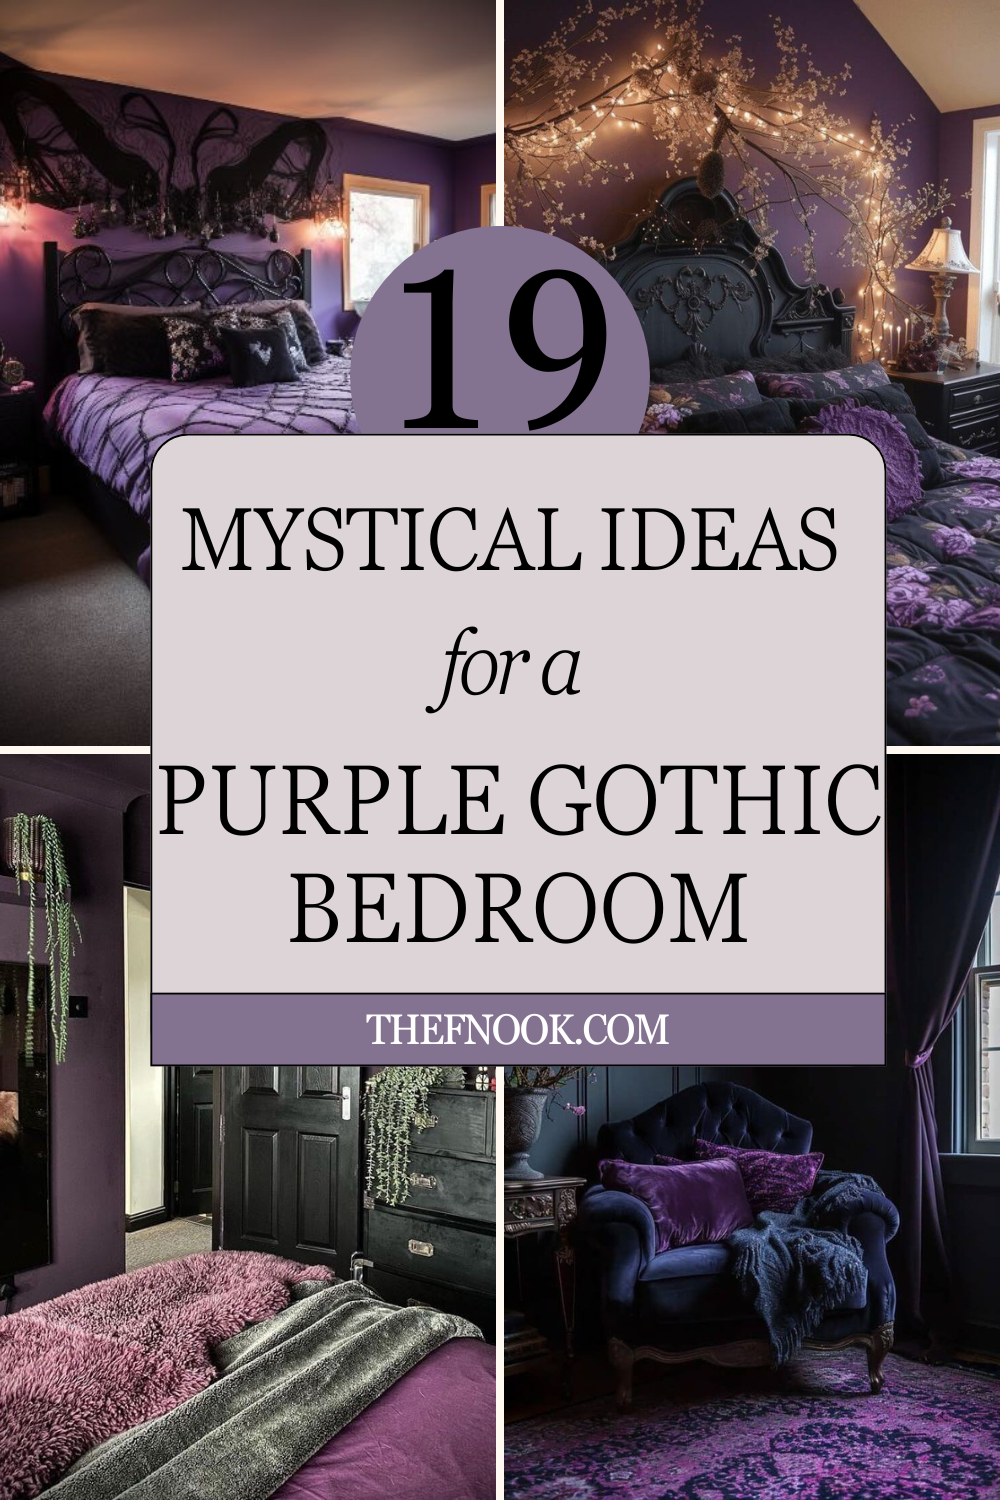 19 Mystical Ideas for a Purple Gothic Bedroom